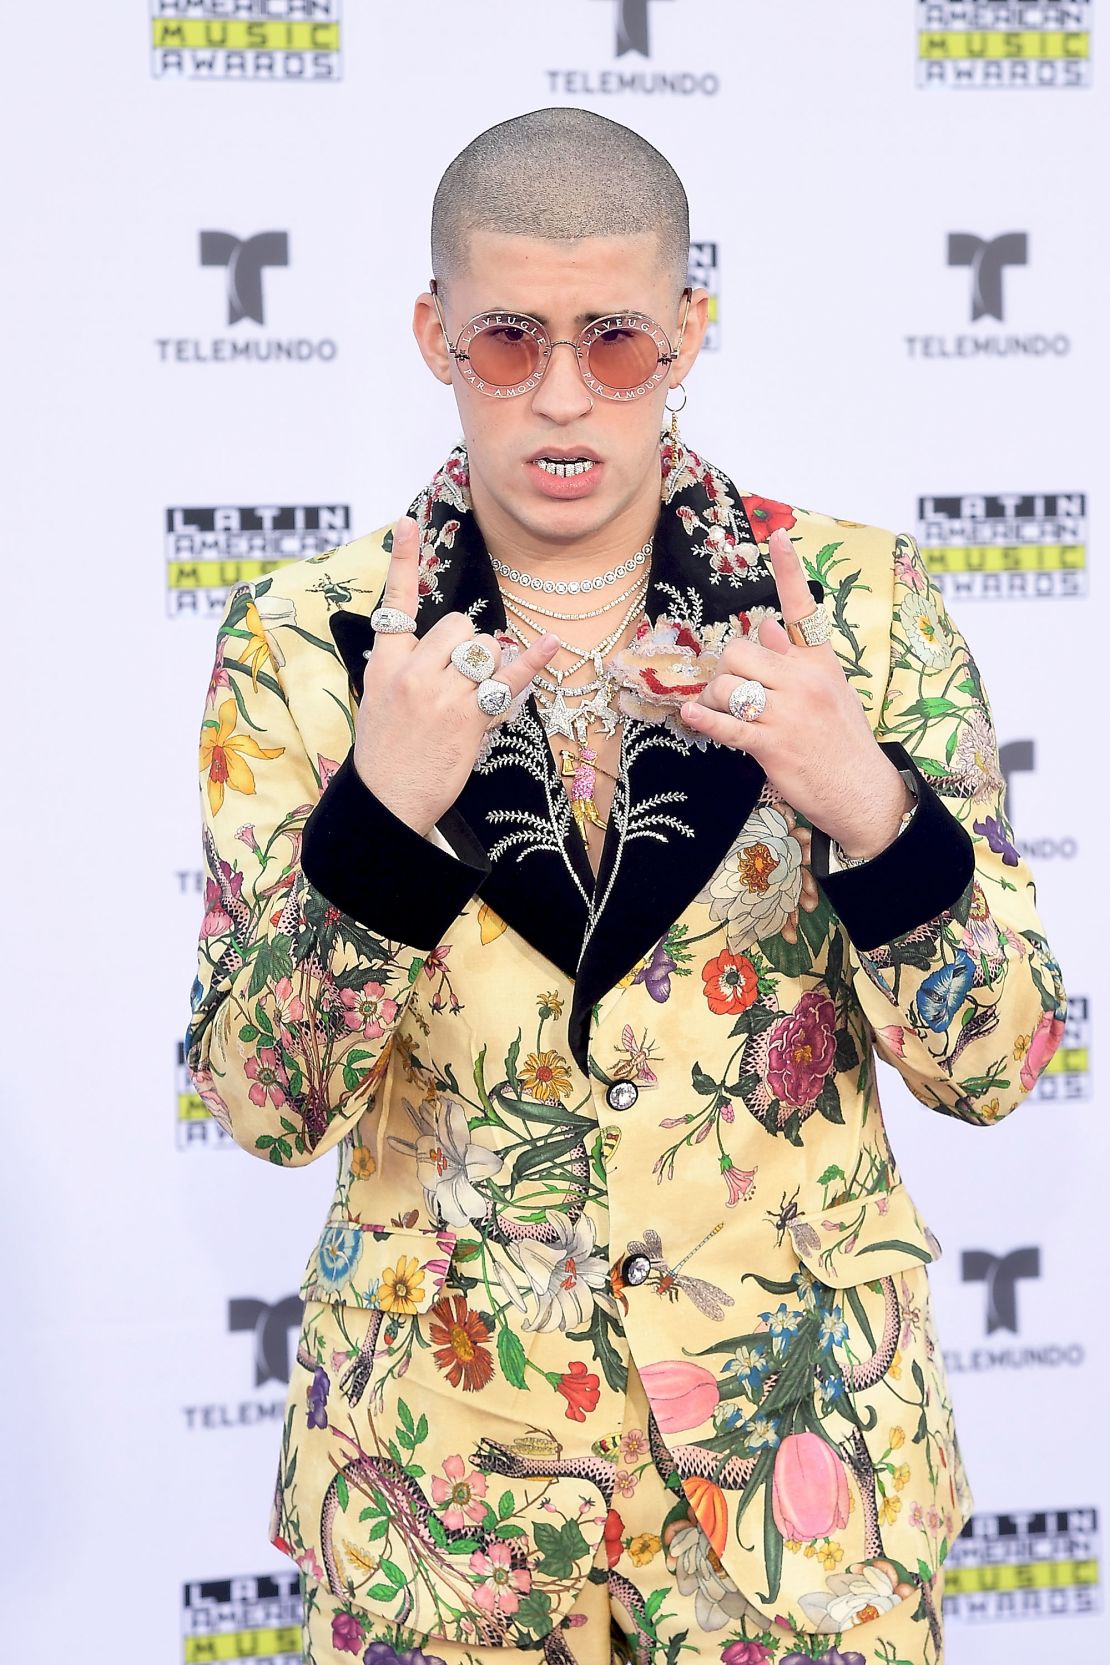 J Balvin is a musical icon, but he's also setting fashion trends